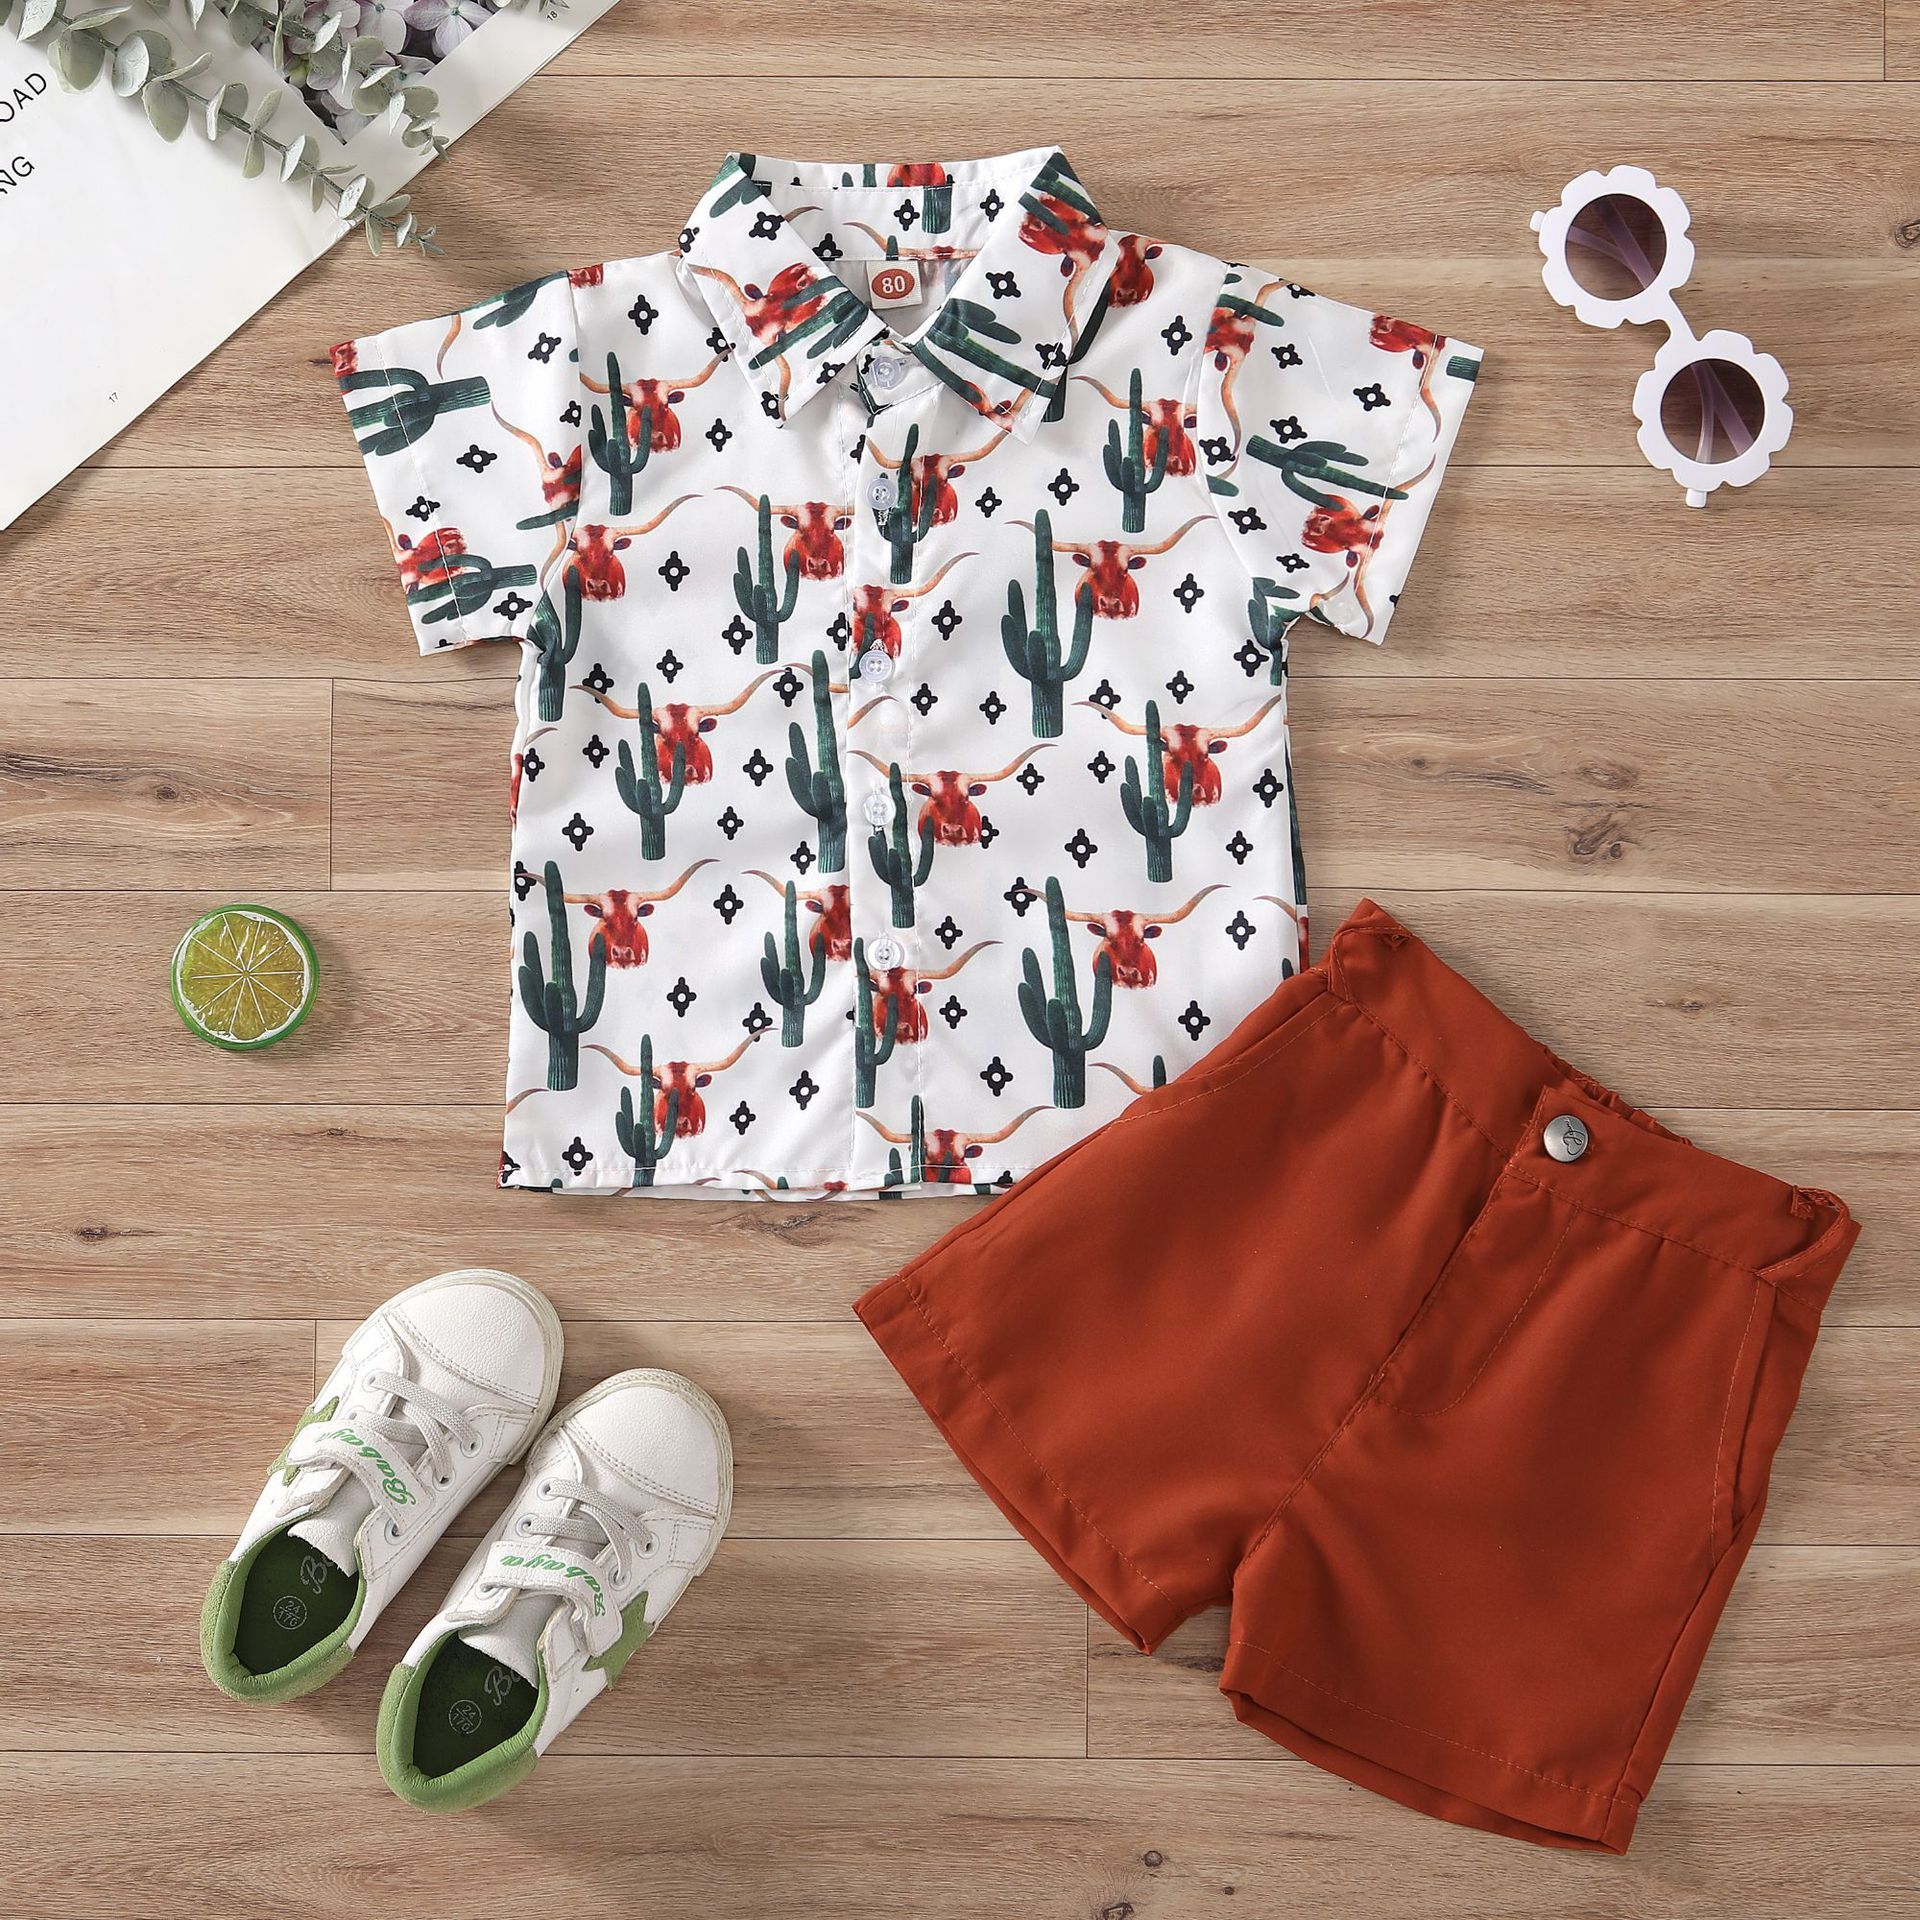 Two-piece Hawaiian-style outfit for kids. Short-sleeved shirt features a tropical print, paired with coordinating shorts. Perfect for summer vacations or luau parties